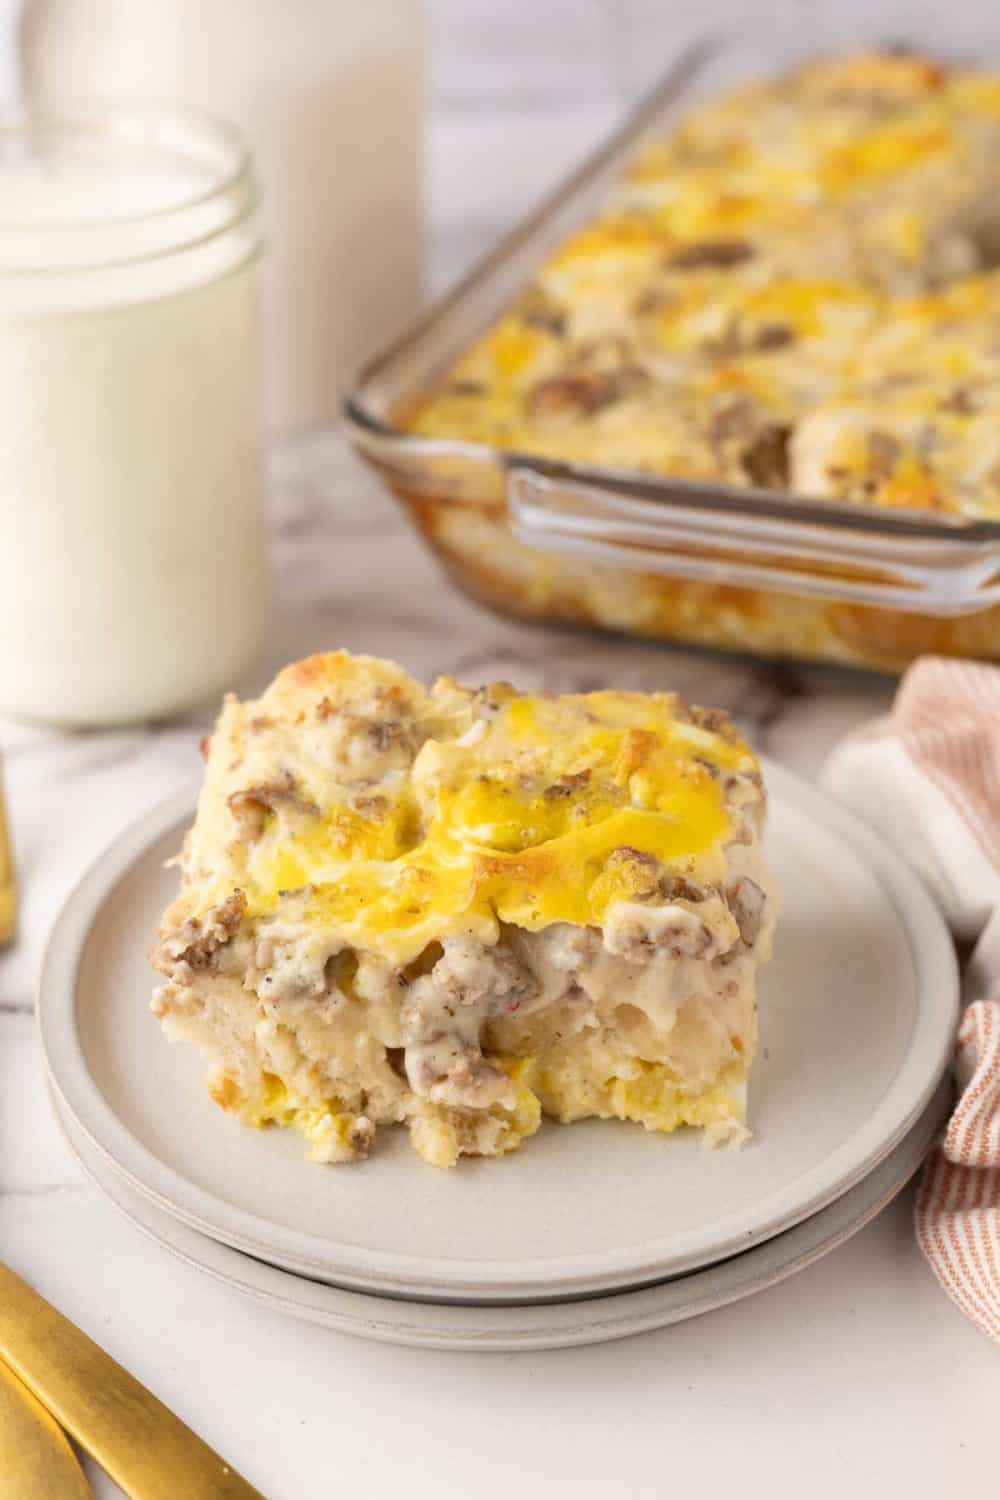 biscuits and gravy casserole recipe served on a round plate.